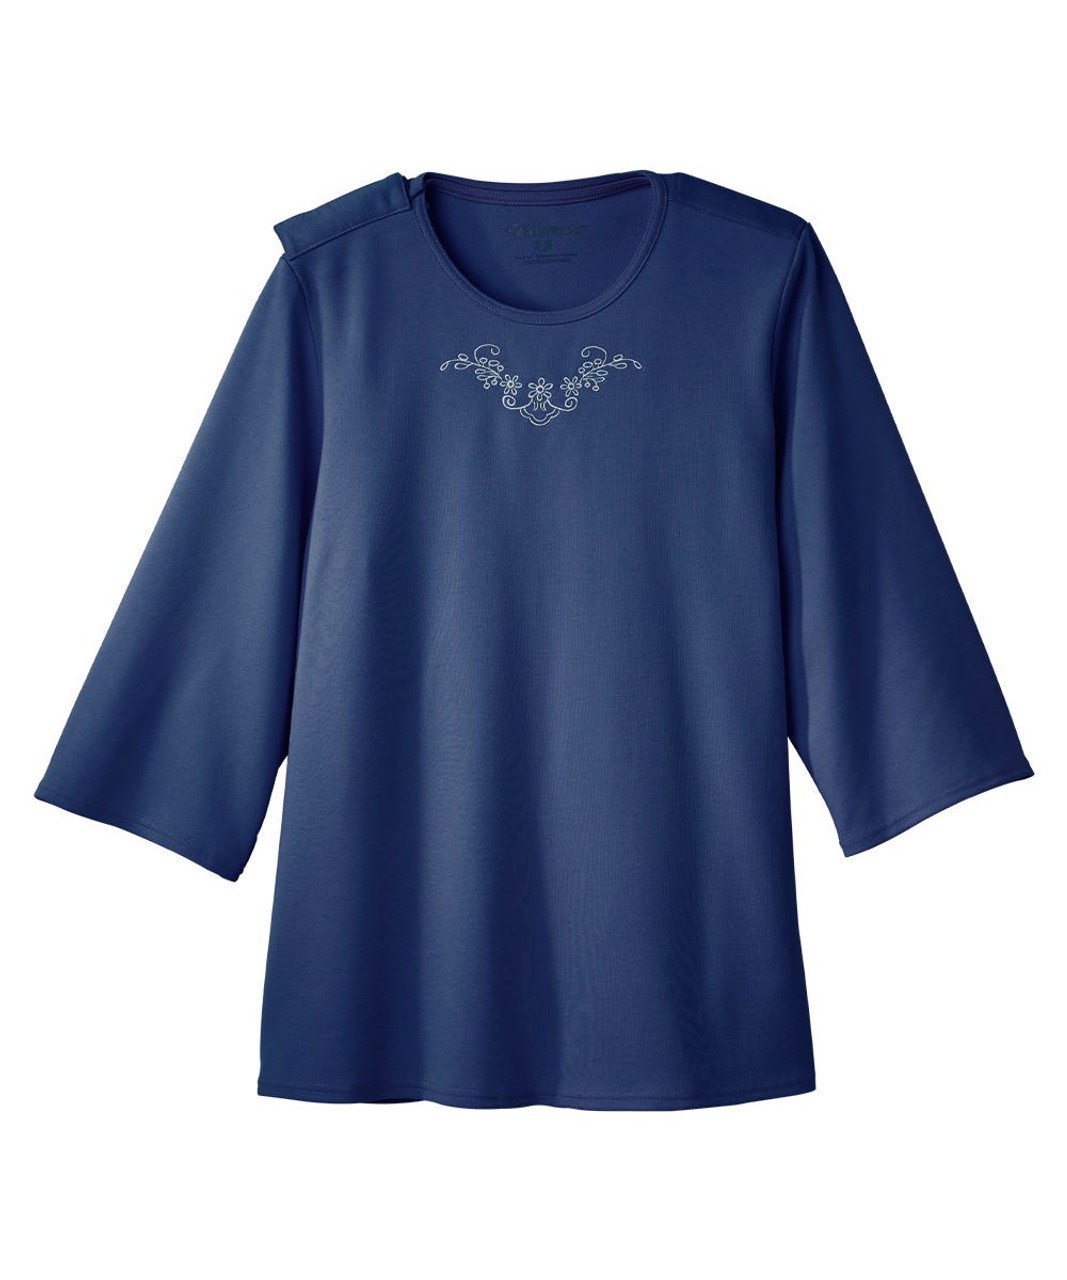 Silverts SV24700 Warm Winter Weight Adaptive Clothing Top for Women Navy, Size=XL, SV24700-NAVY-XL